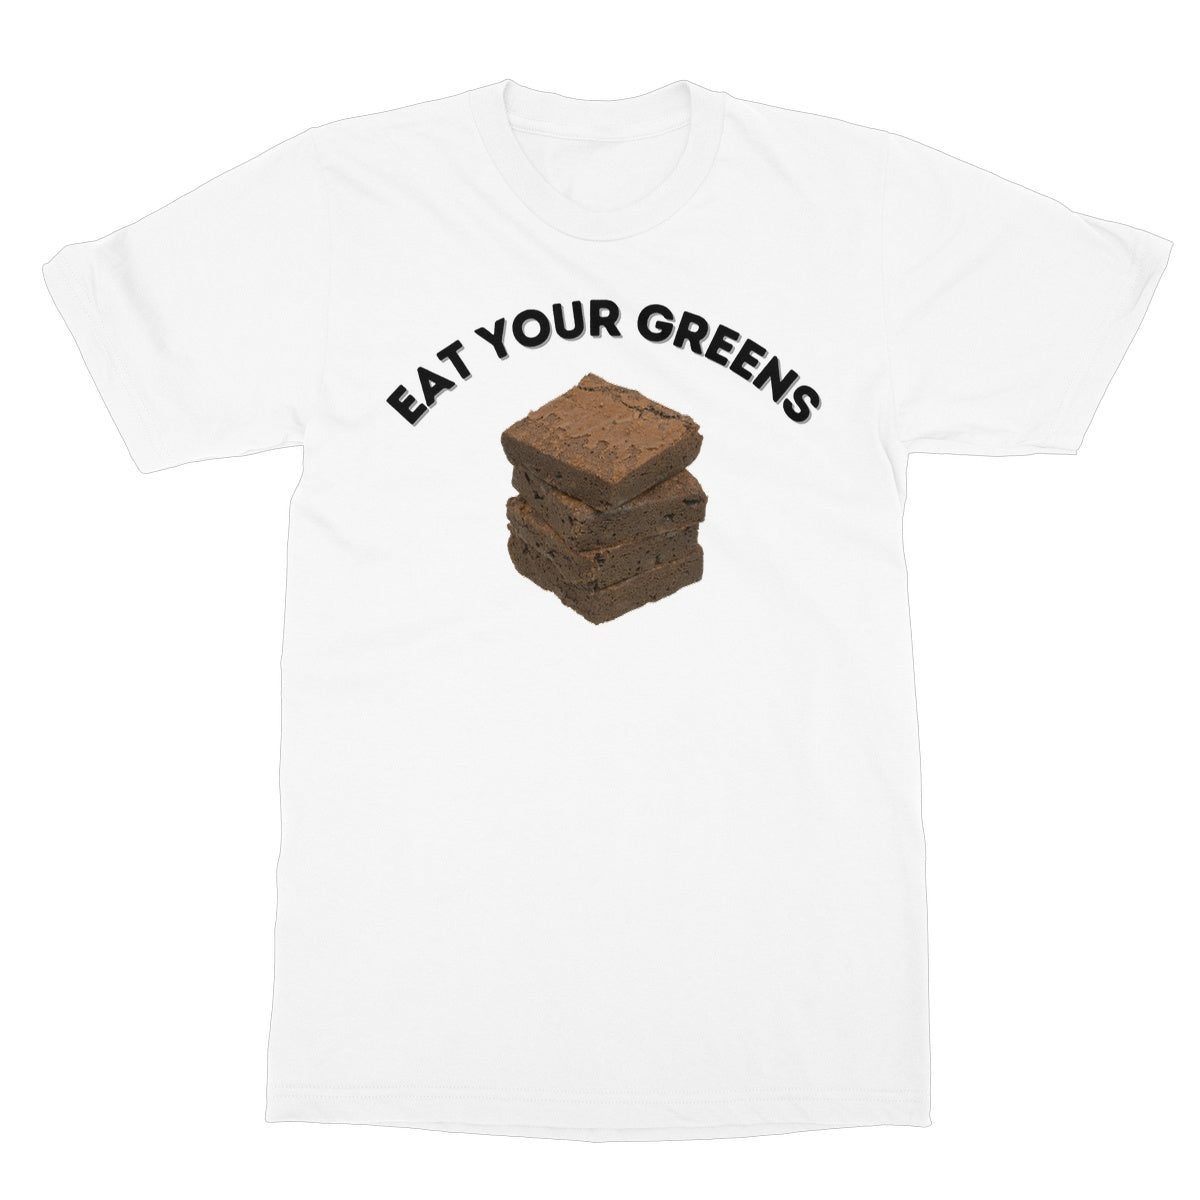 eat your greens t shirt white